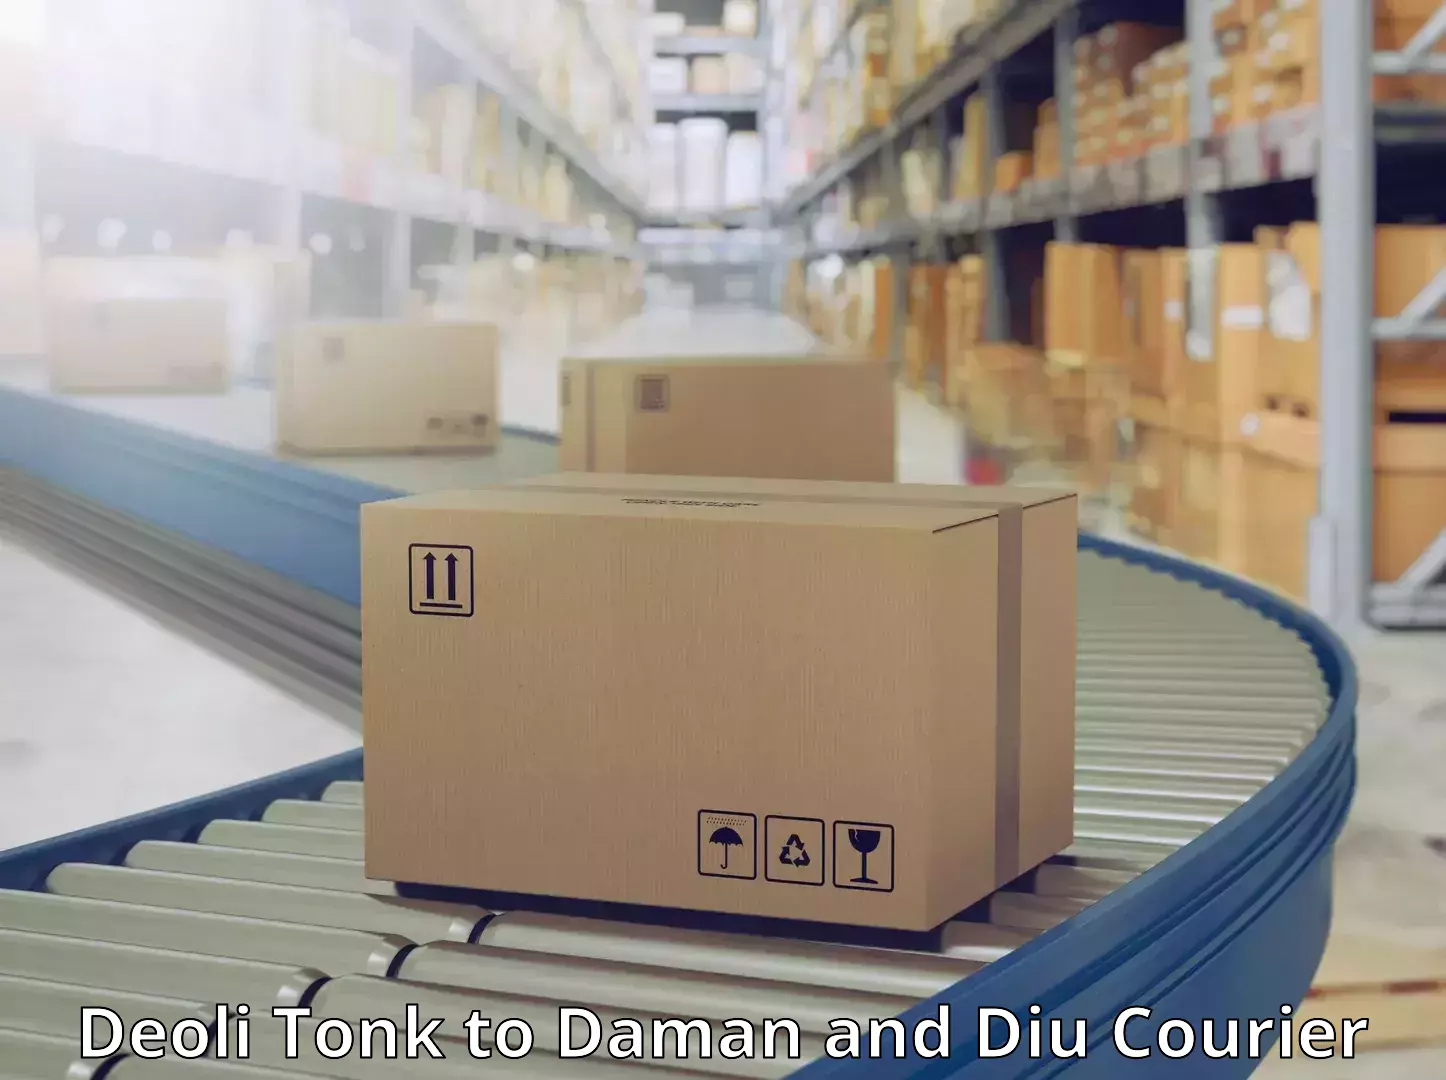 Online courier booking Deoli Tonk to Diu